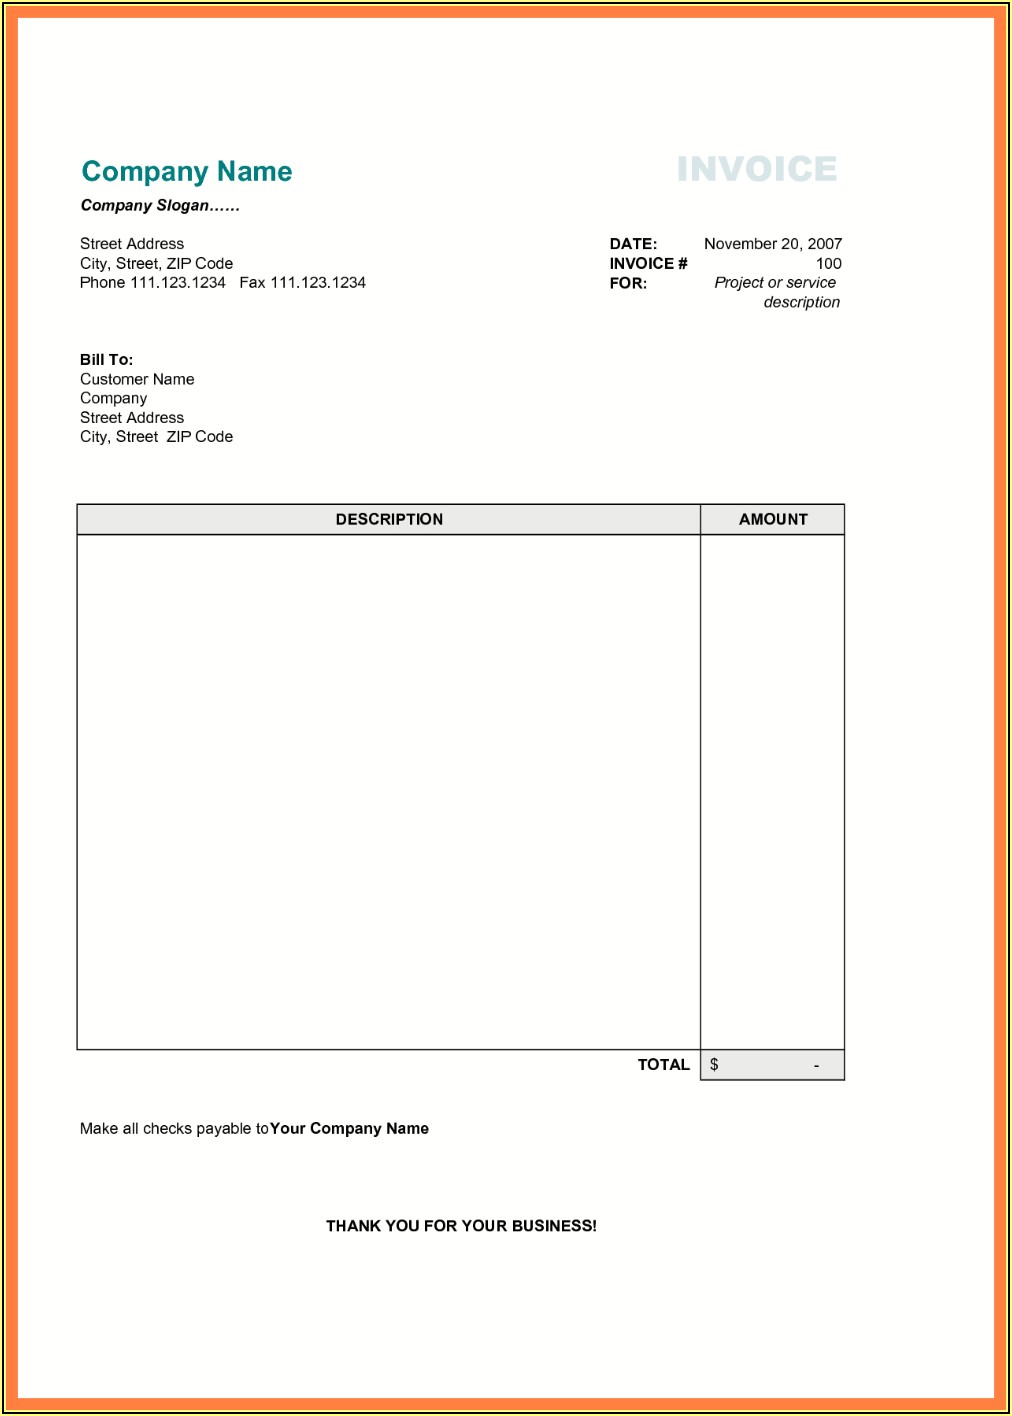 Invoice Format In Word Free